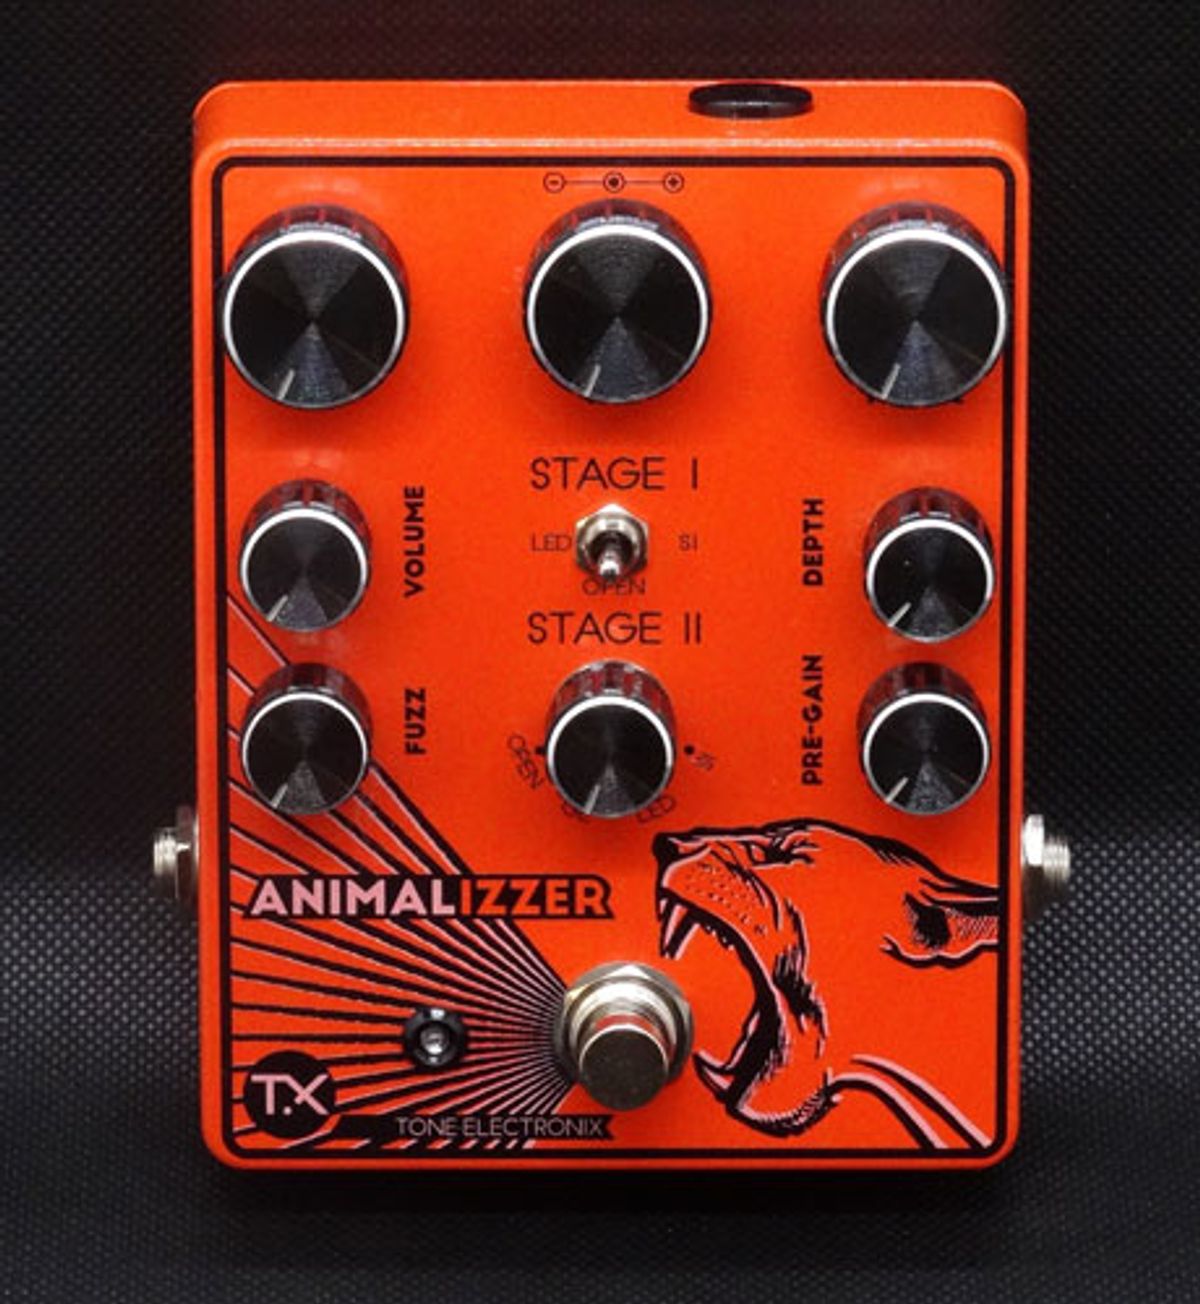 Tone Electronix Releases the Animalizzer